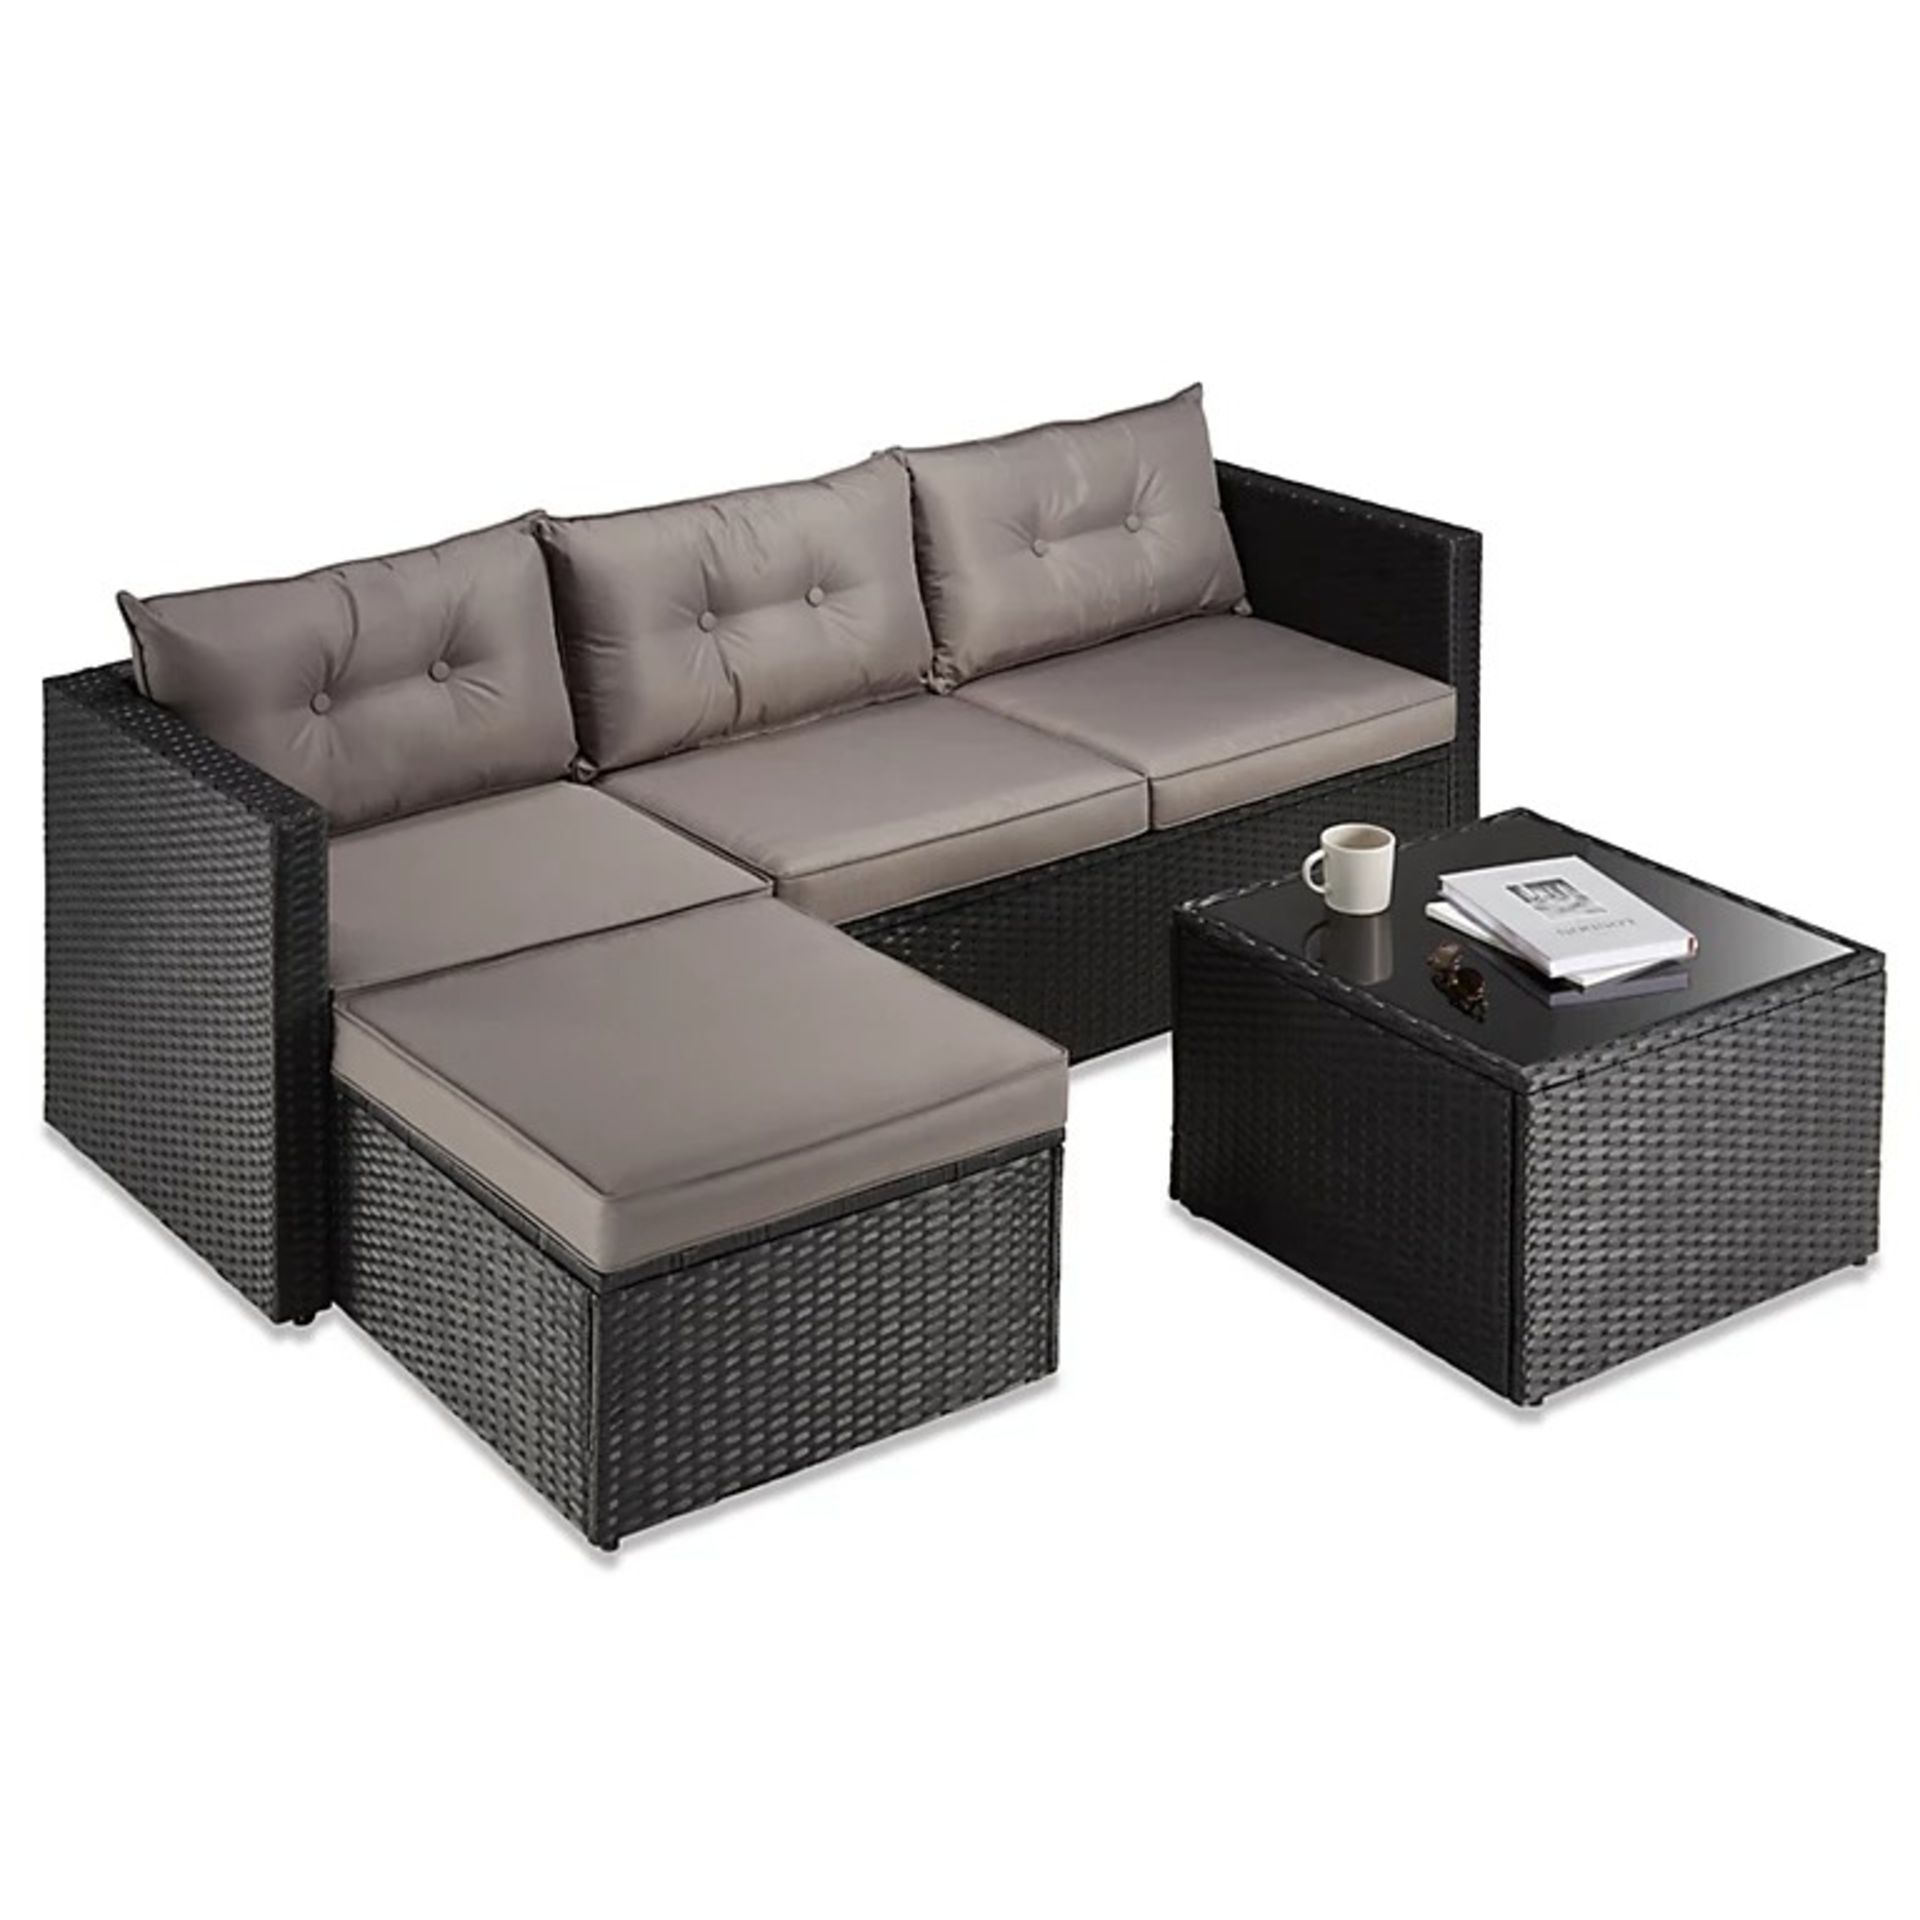 2x Charleston Modular Corner Rattan Sofa Pieces V- ER52 - Made of rattan weave which has the